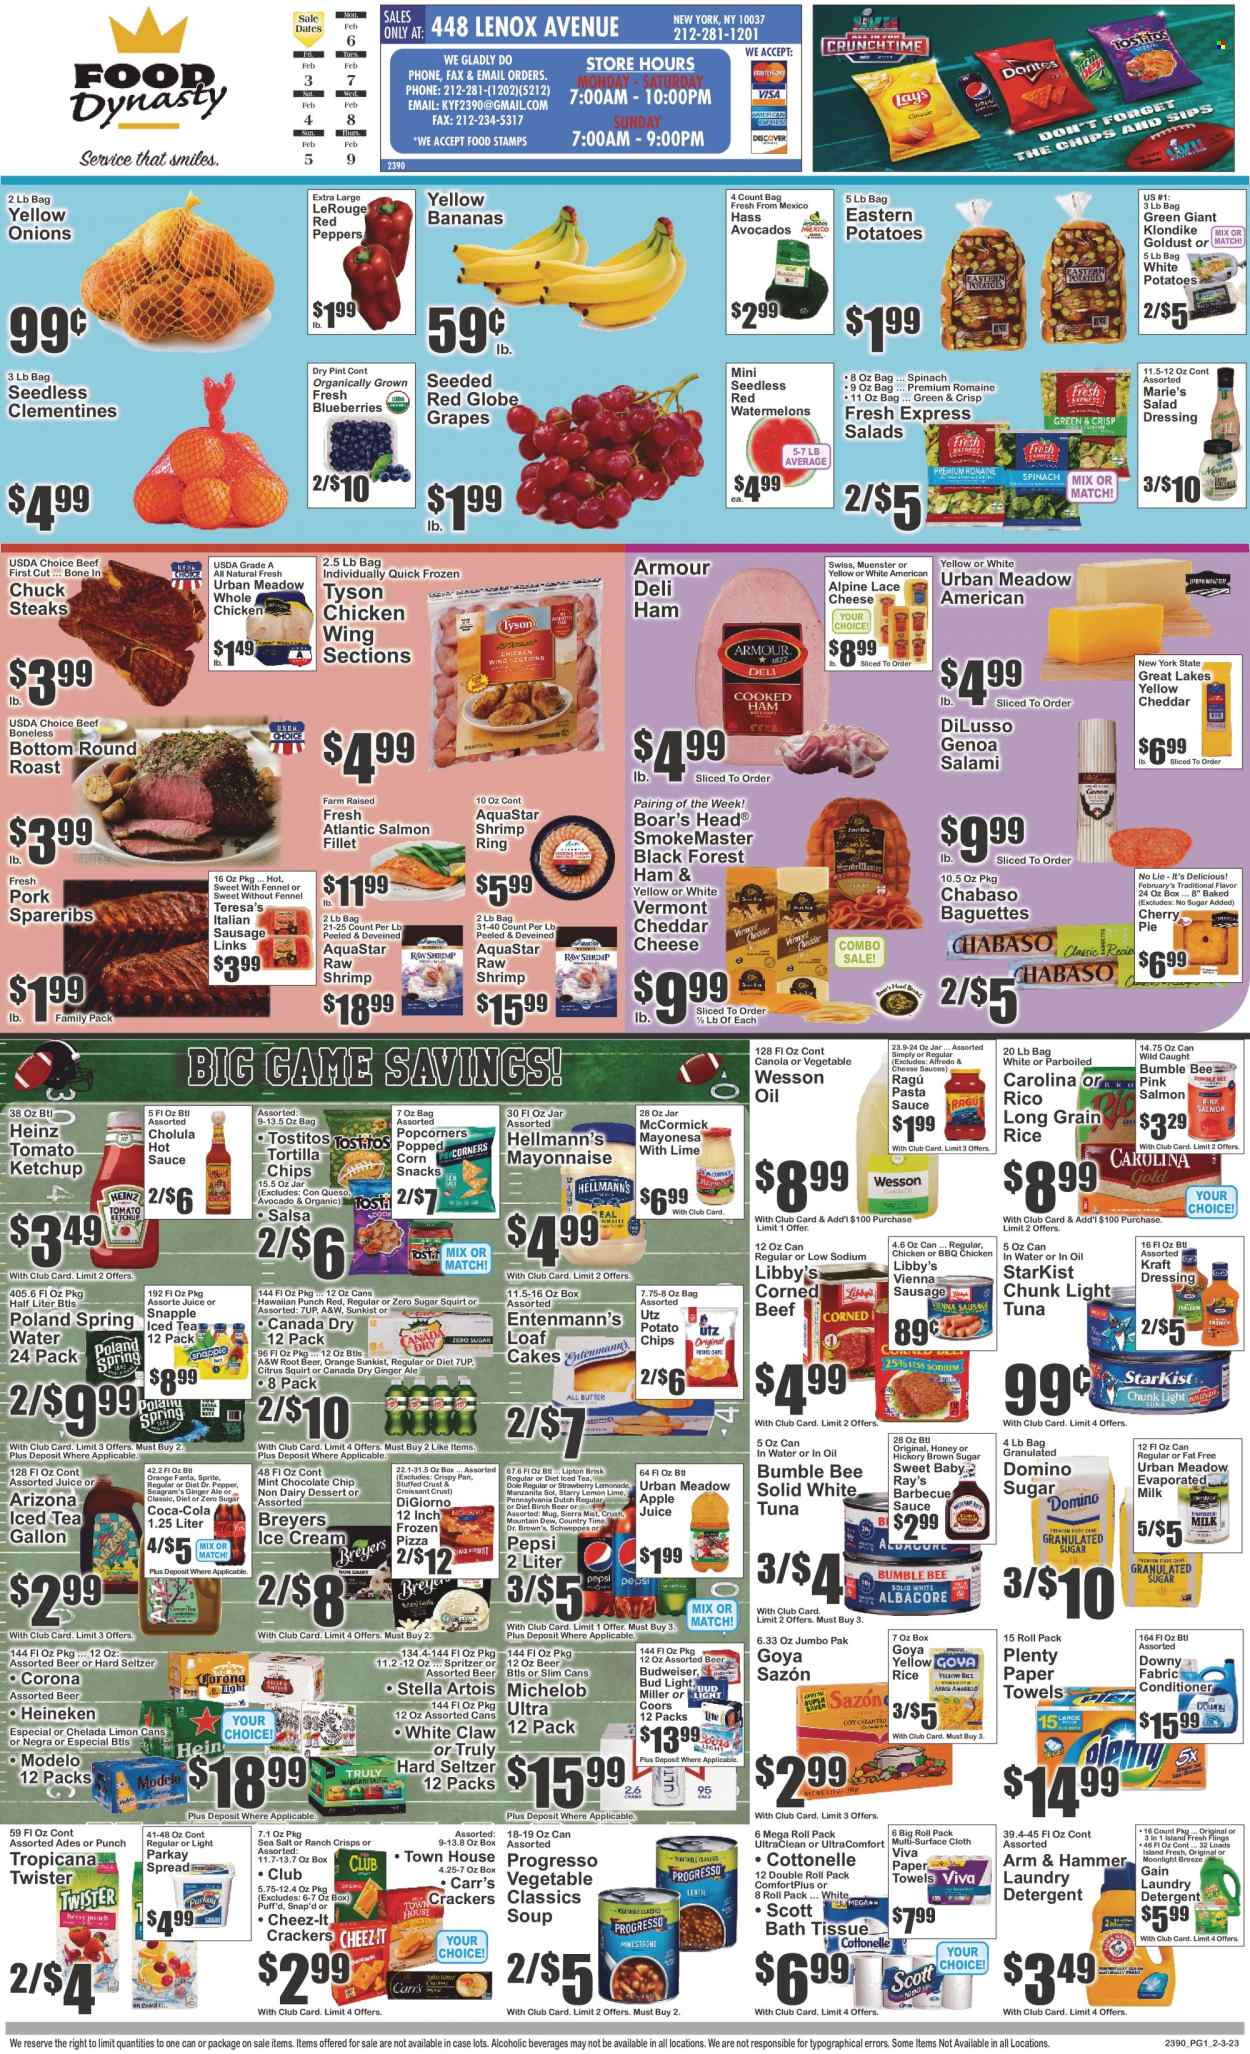 thumbnail - Food Dynasty Flyer - 02/03/2023 - 02/09/2023 - Sales products - baguette, cake, pie, croissant, Entenmann's, cherry pie, Dole, peppers, red peppers, avocado, blueberries, grapes, Red Globe, oranges, salmon, salmon fillet, tuna, shrimps, StarKist, pizza, pasta sauce, soup, Bumble Bee, Progresso, Kraft®, ragú pasta, salami, ham, sausage, vienna sausage, italian sausage, corned beef, Münster cheese, evaporated milk, mayonnaise, Hellmann’s, ice cream, snack, crackers, tortilla chips, potato chips, popcorn, Cheez-It, Tostitos, ARM & HAMMER, cane sugar, Heinz, light tuna, Goya, long grain rice, fennel, BBQ sauce, salad dressing, hot sauce, ketchup, dressing, salsa, ragu, apple juice, Canada Dry, ginger ale, lemonade, Mountain Dew, Schweppes, Sprite, Pepsi, juice, Fanta, Lipton, ice tea, Dr. Pepper, 7UP, AriZona, Snapple, Dr. Brown's, A&W, Sierra Mist, Tropicana Twister, Country Time, spring water, White Claw, Hard Seltzer, TRULY, beer, Stella Artois, Bud Light, Corona Extra, Heineken, Miller, Modelo, whole chicken, beef meat, steak, round roast, pork spare ribs, bath tissue, Cottonelle, Scott, Plenty, kitchen towels, paper towels, detergent, Gain, laundry detergent, Downy Laundry, Lenox, mug, pan, Budweiser, clementines, Coors, Michelob. Page 1.